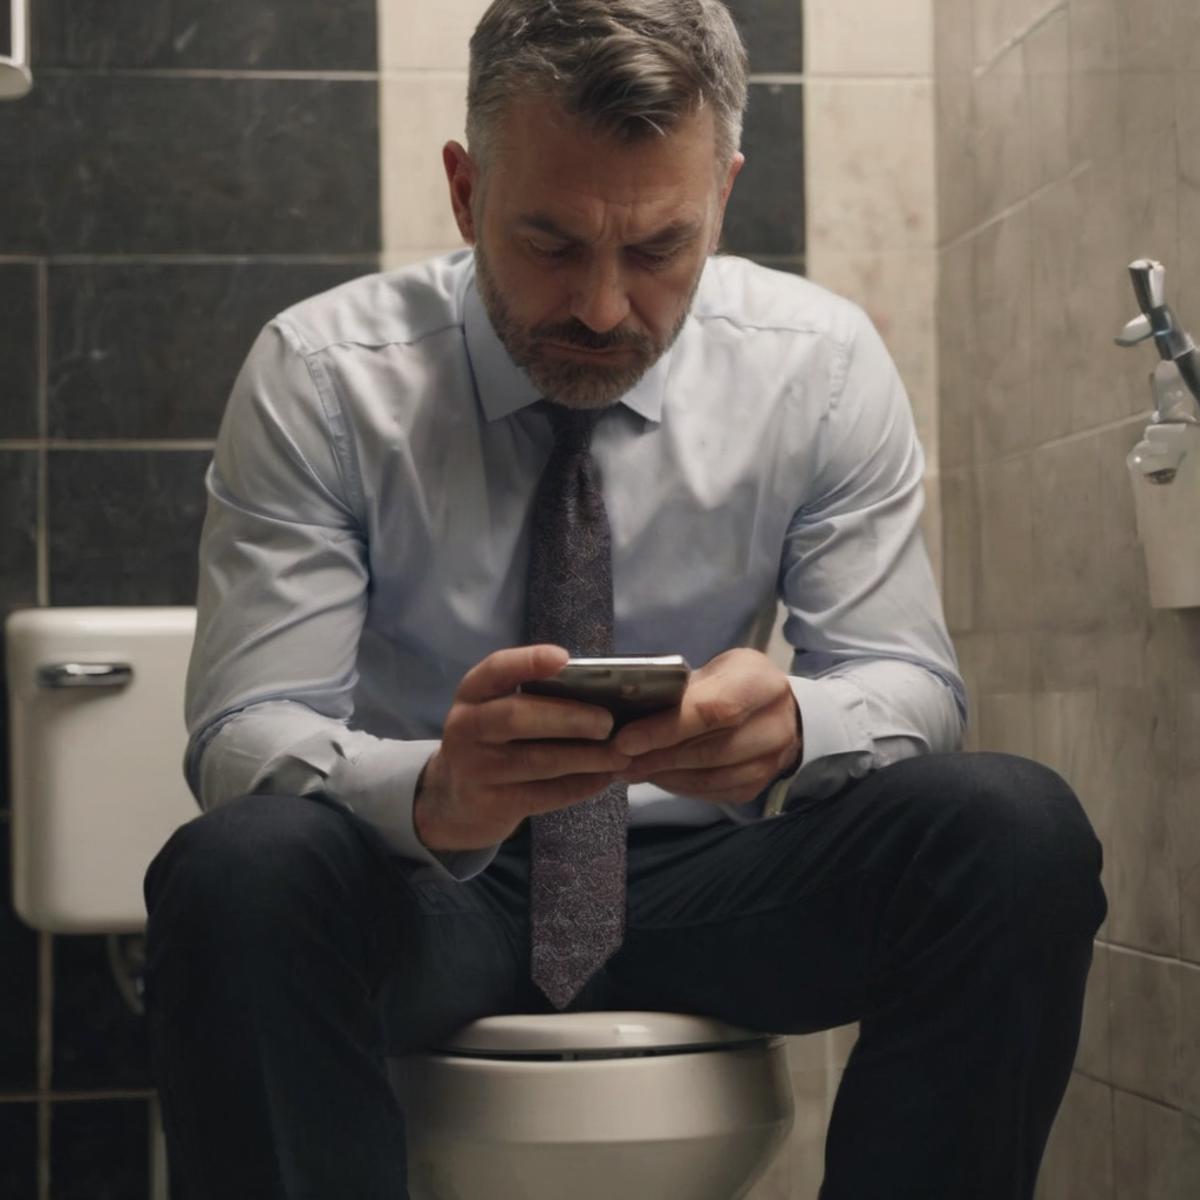 Man in a shirt and tie sitting on a toilet and using a cell phone.